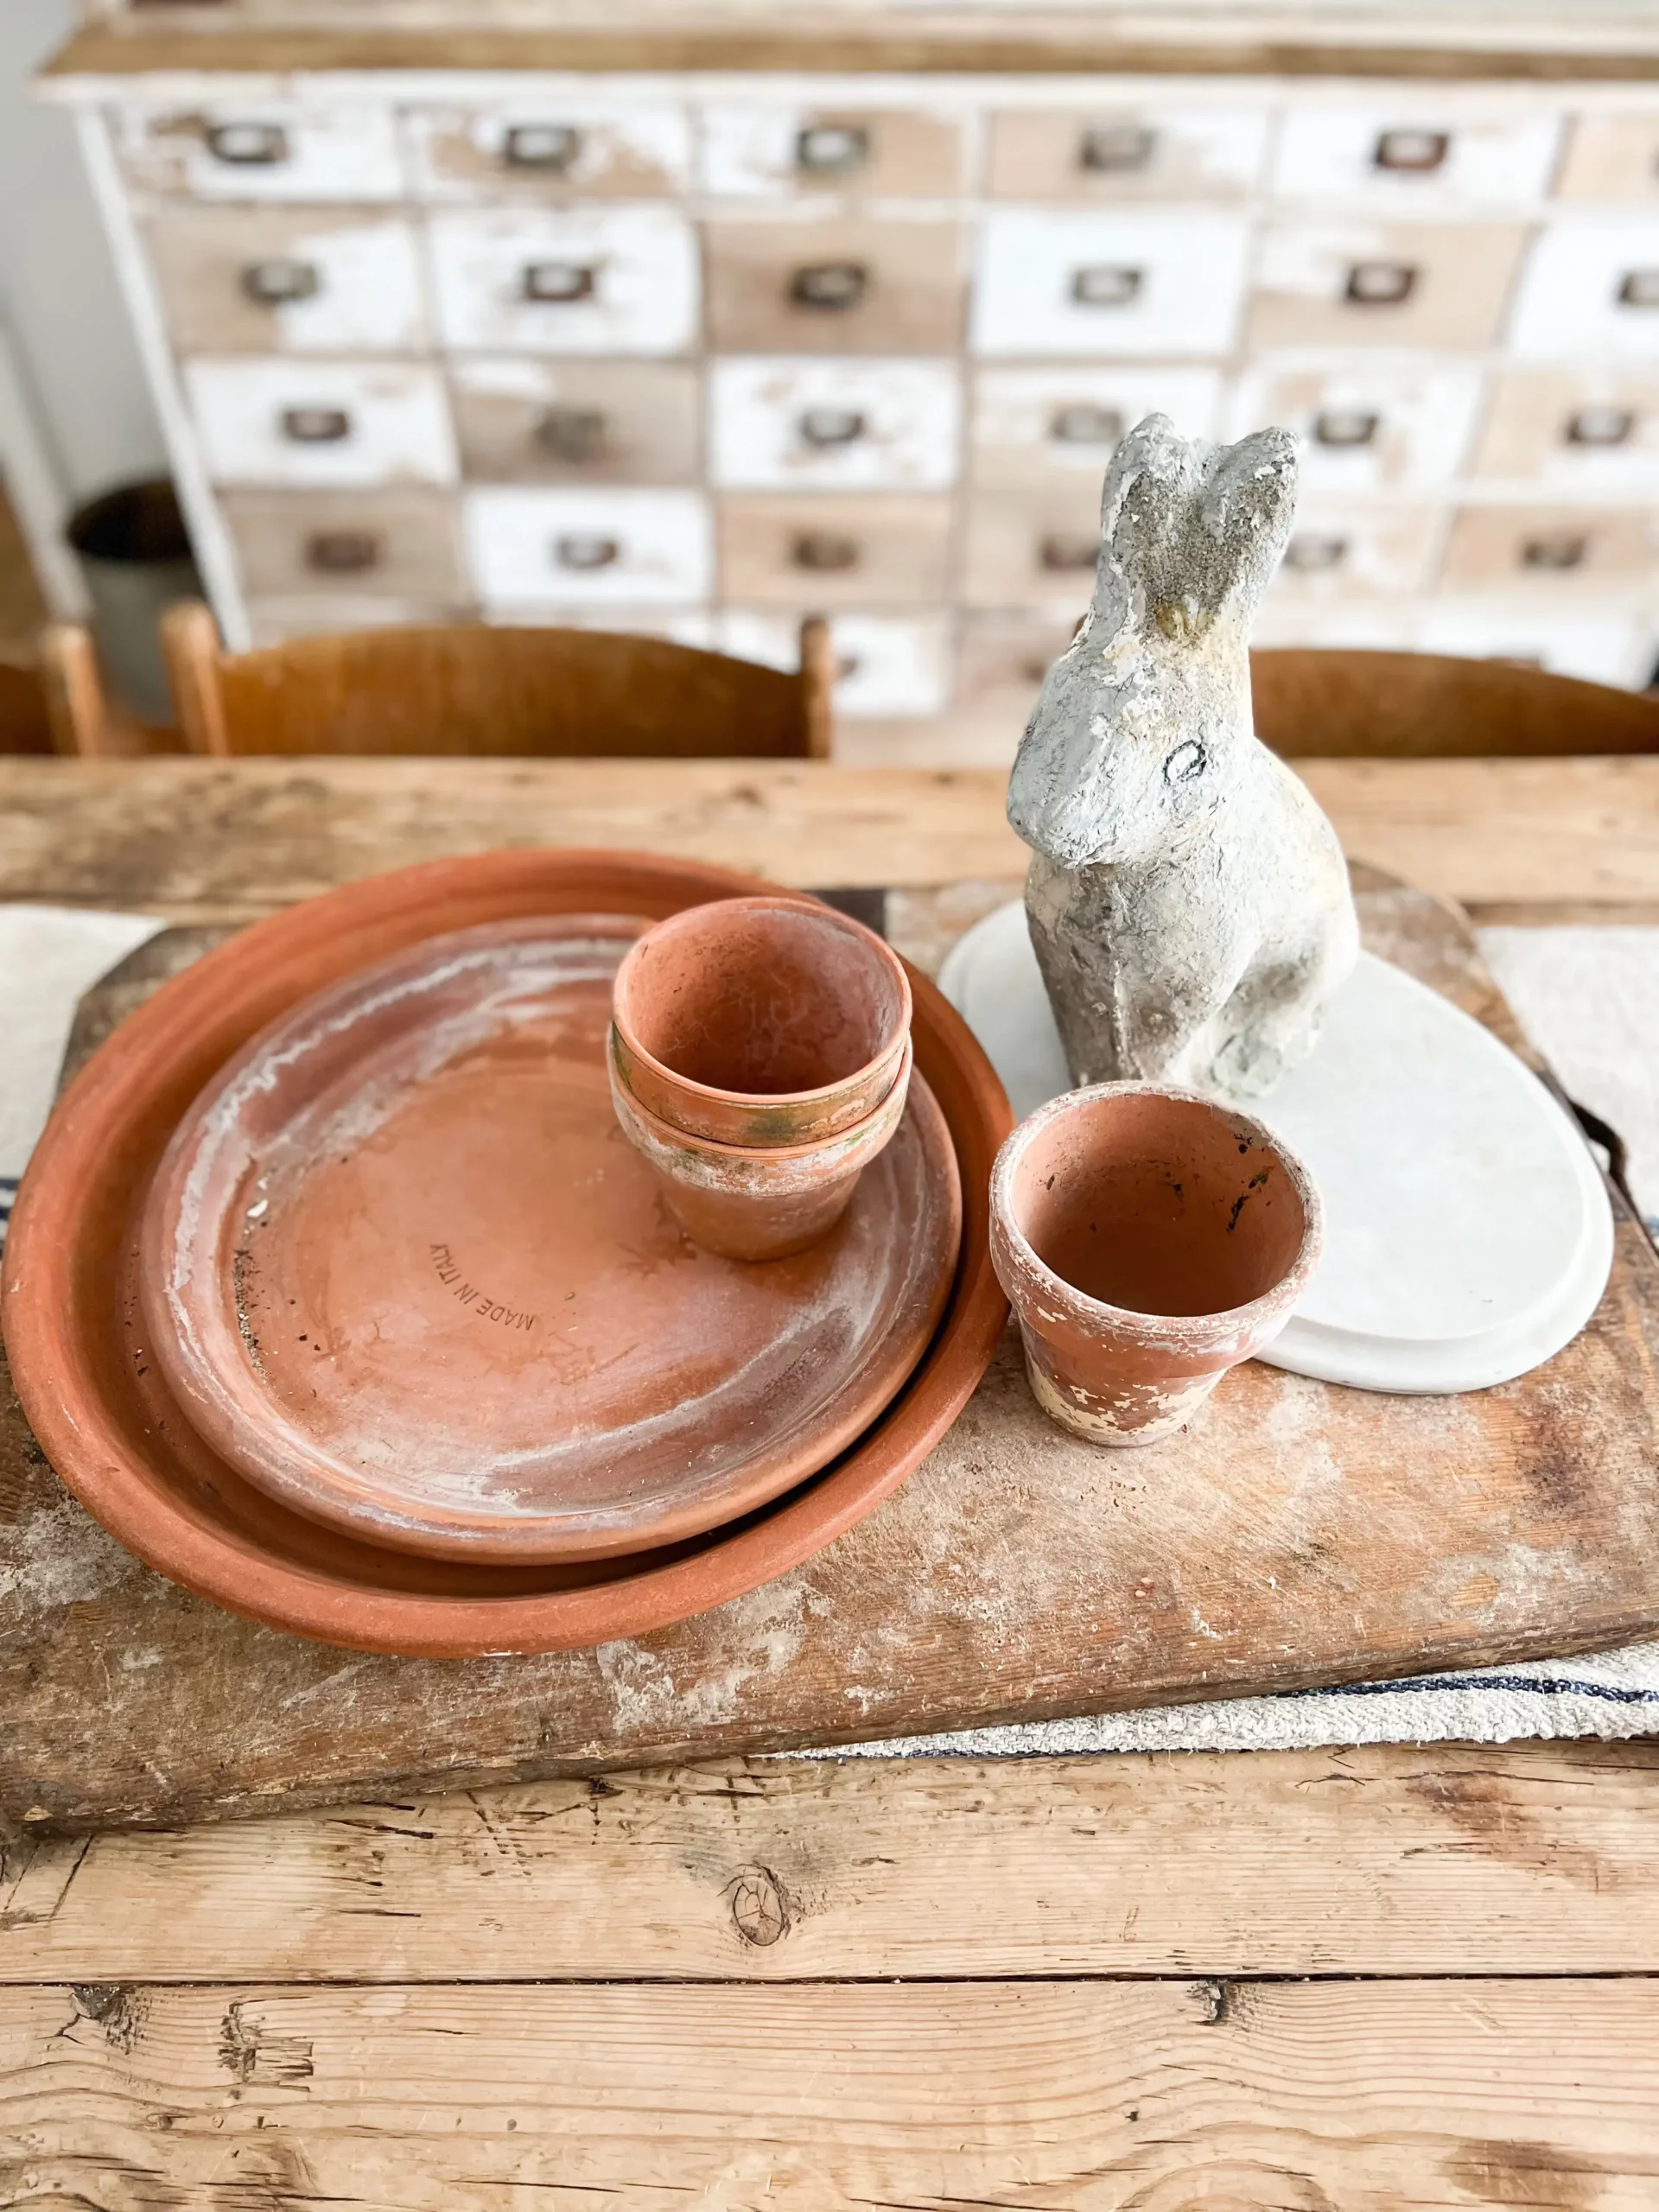 closeup of a bread board with terracotta saucers and pots as well as a cement bunny on top